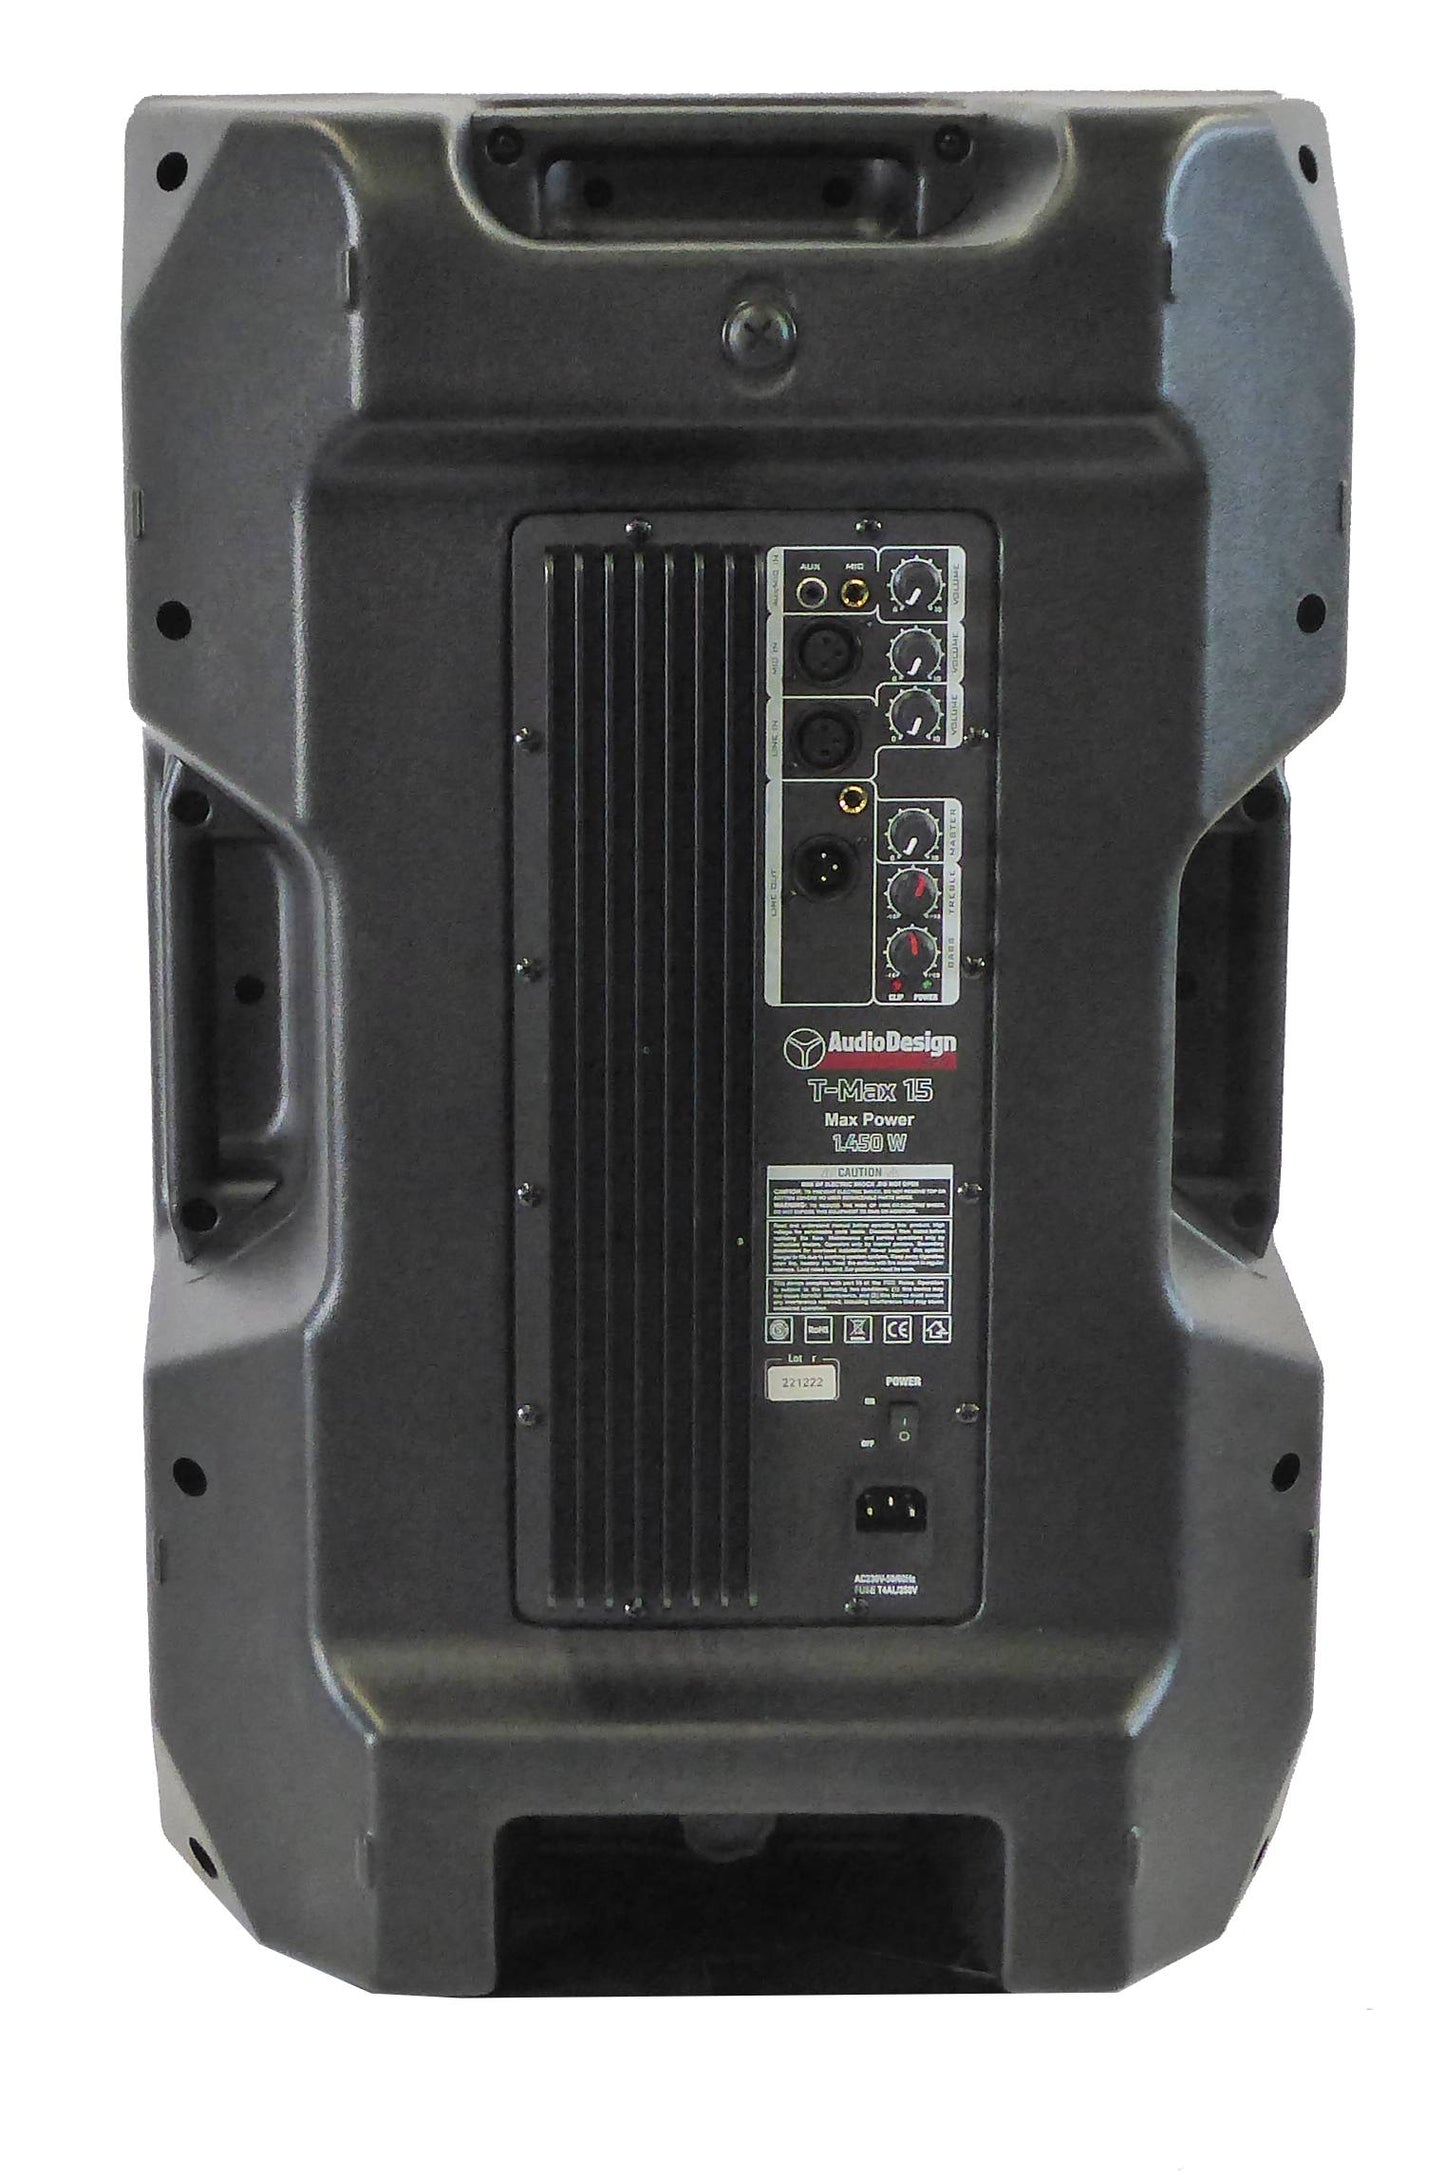 AudioDesign Pro T-MAX15 Professional 2-way active speaker, cabinet with 380mm woofer with 1450W power